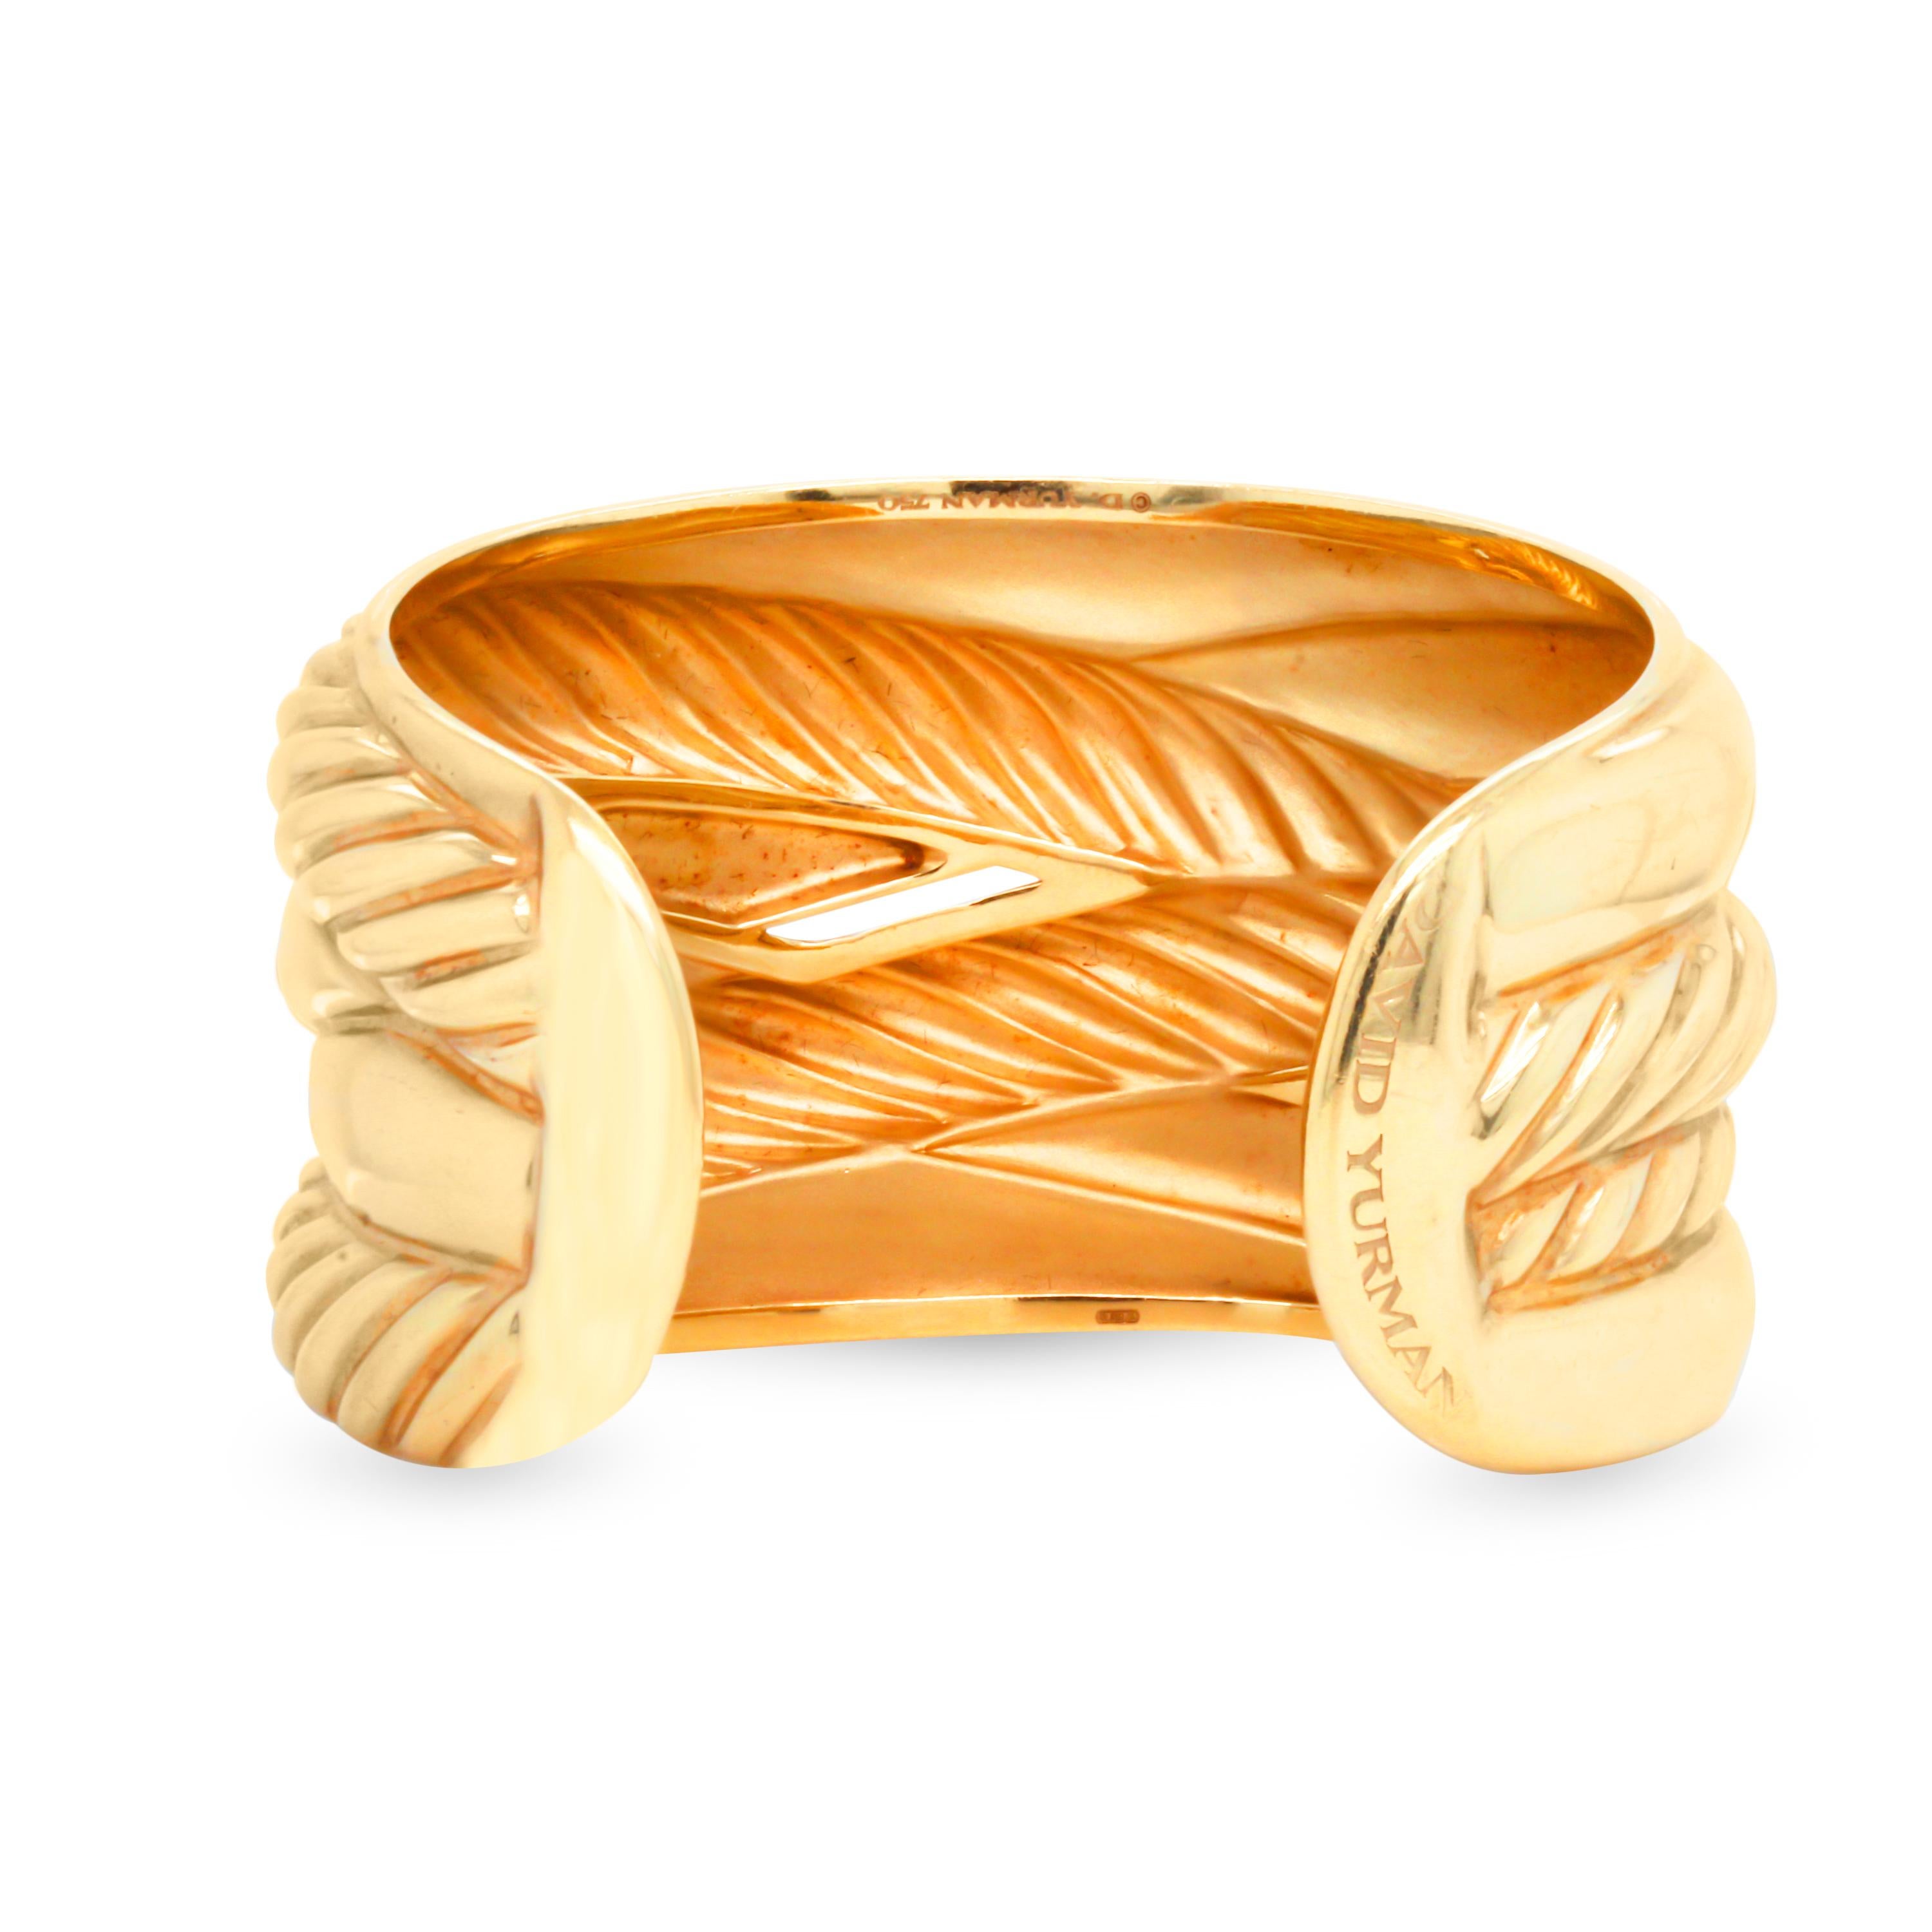 18K Yellow Gold Wide Cuff Bangle Bracelet from the Pure Form collection by David Yurman

This unique and elegant cuff bangle features a cable-like design and is open underneath to fit perfectly on the wrist

Bangle is 1.61 inch width. 7 inches in